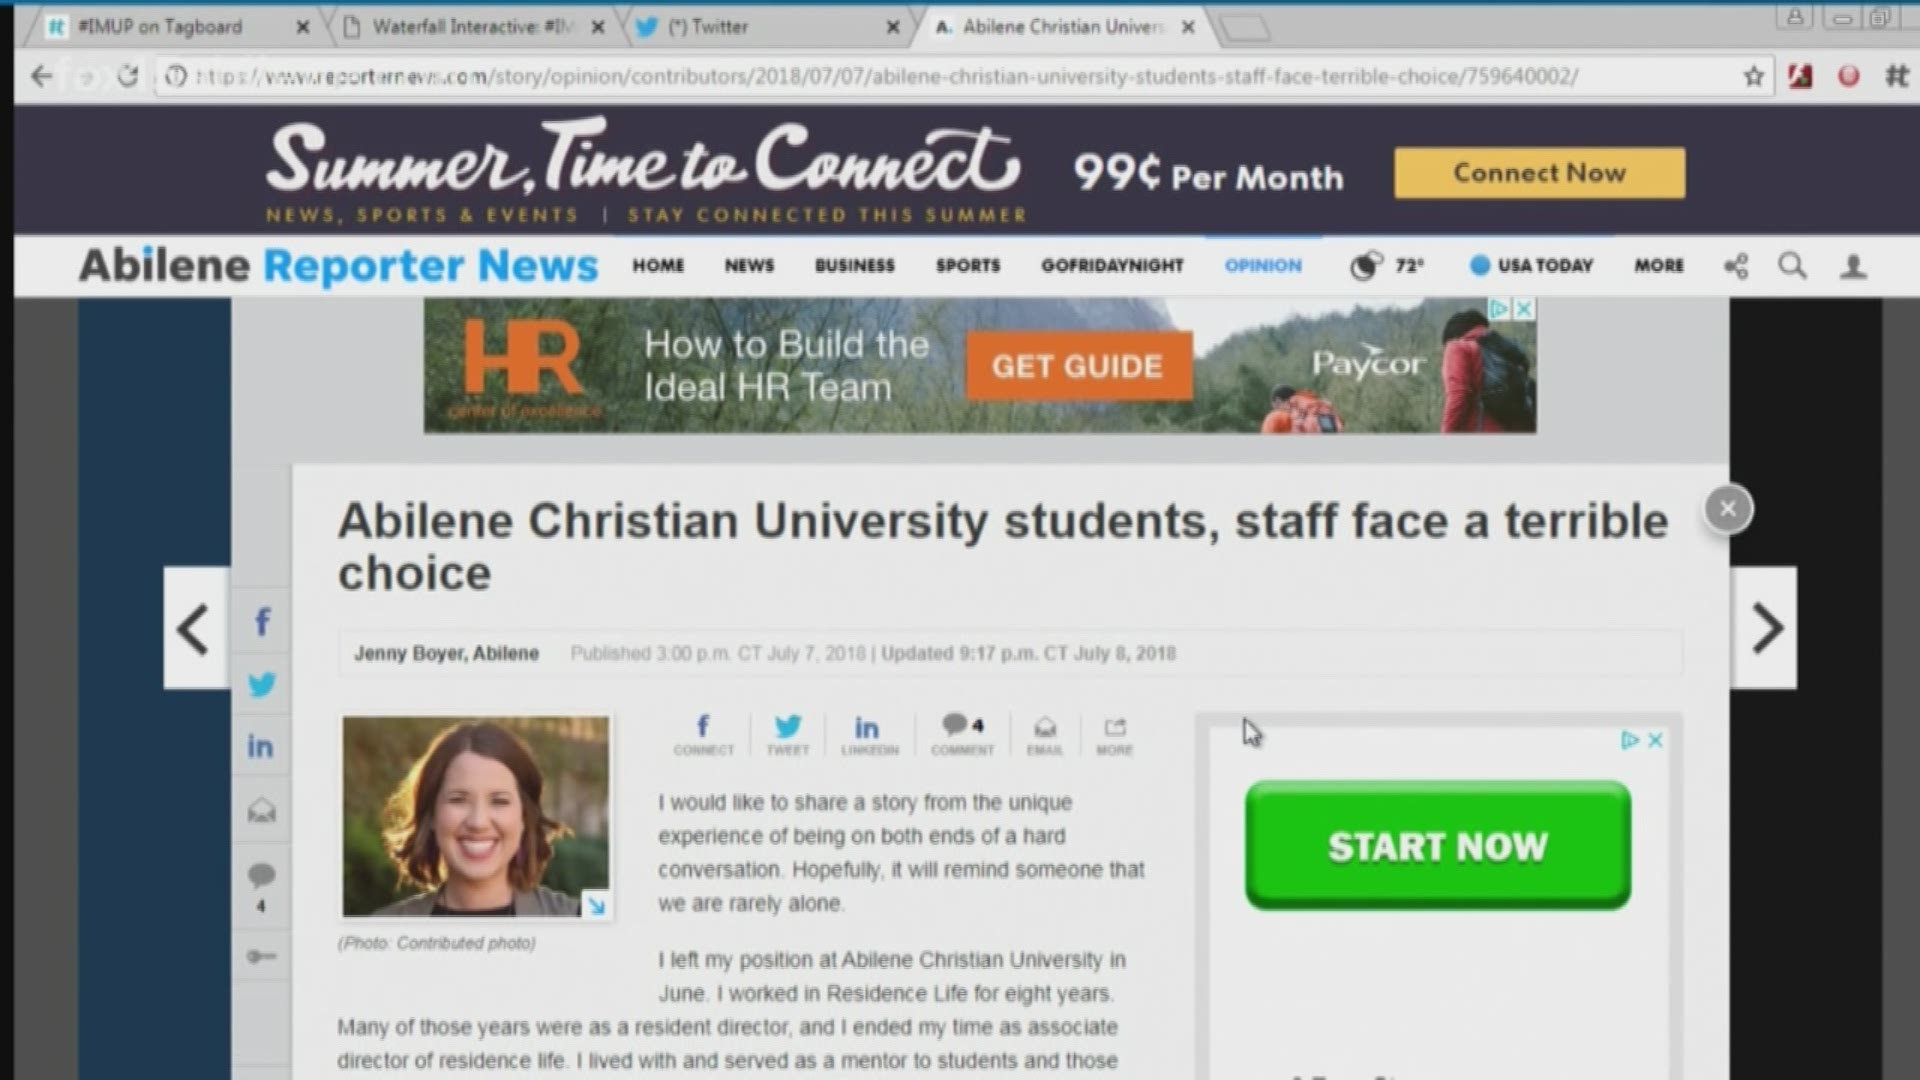 Months after Abilene Christian University battled claims of racism on campus, the school is back in the headlines. This time, after a former staff member says she was forced to either end her same-sex relationship or leave campus immediately.